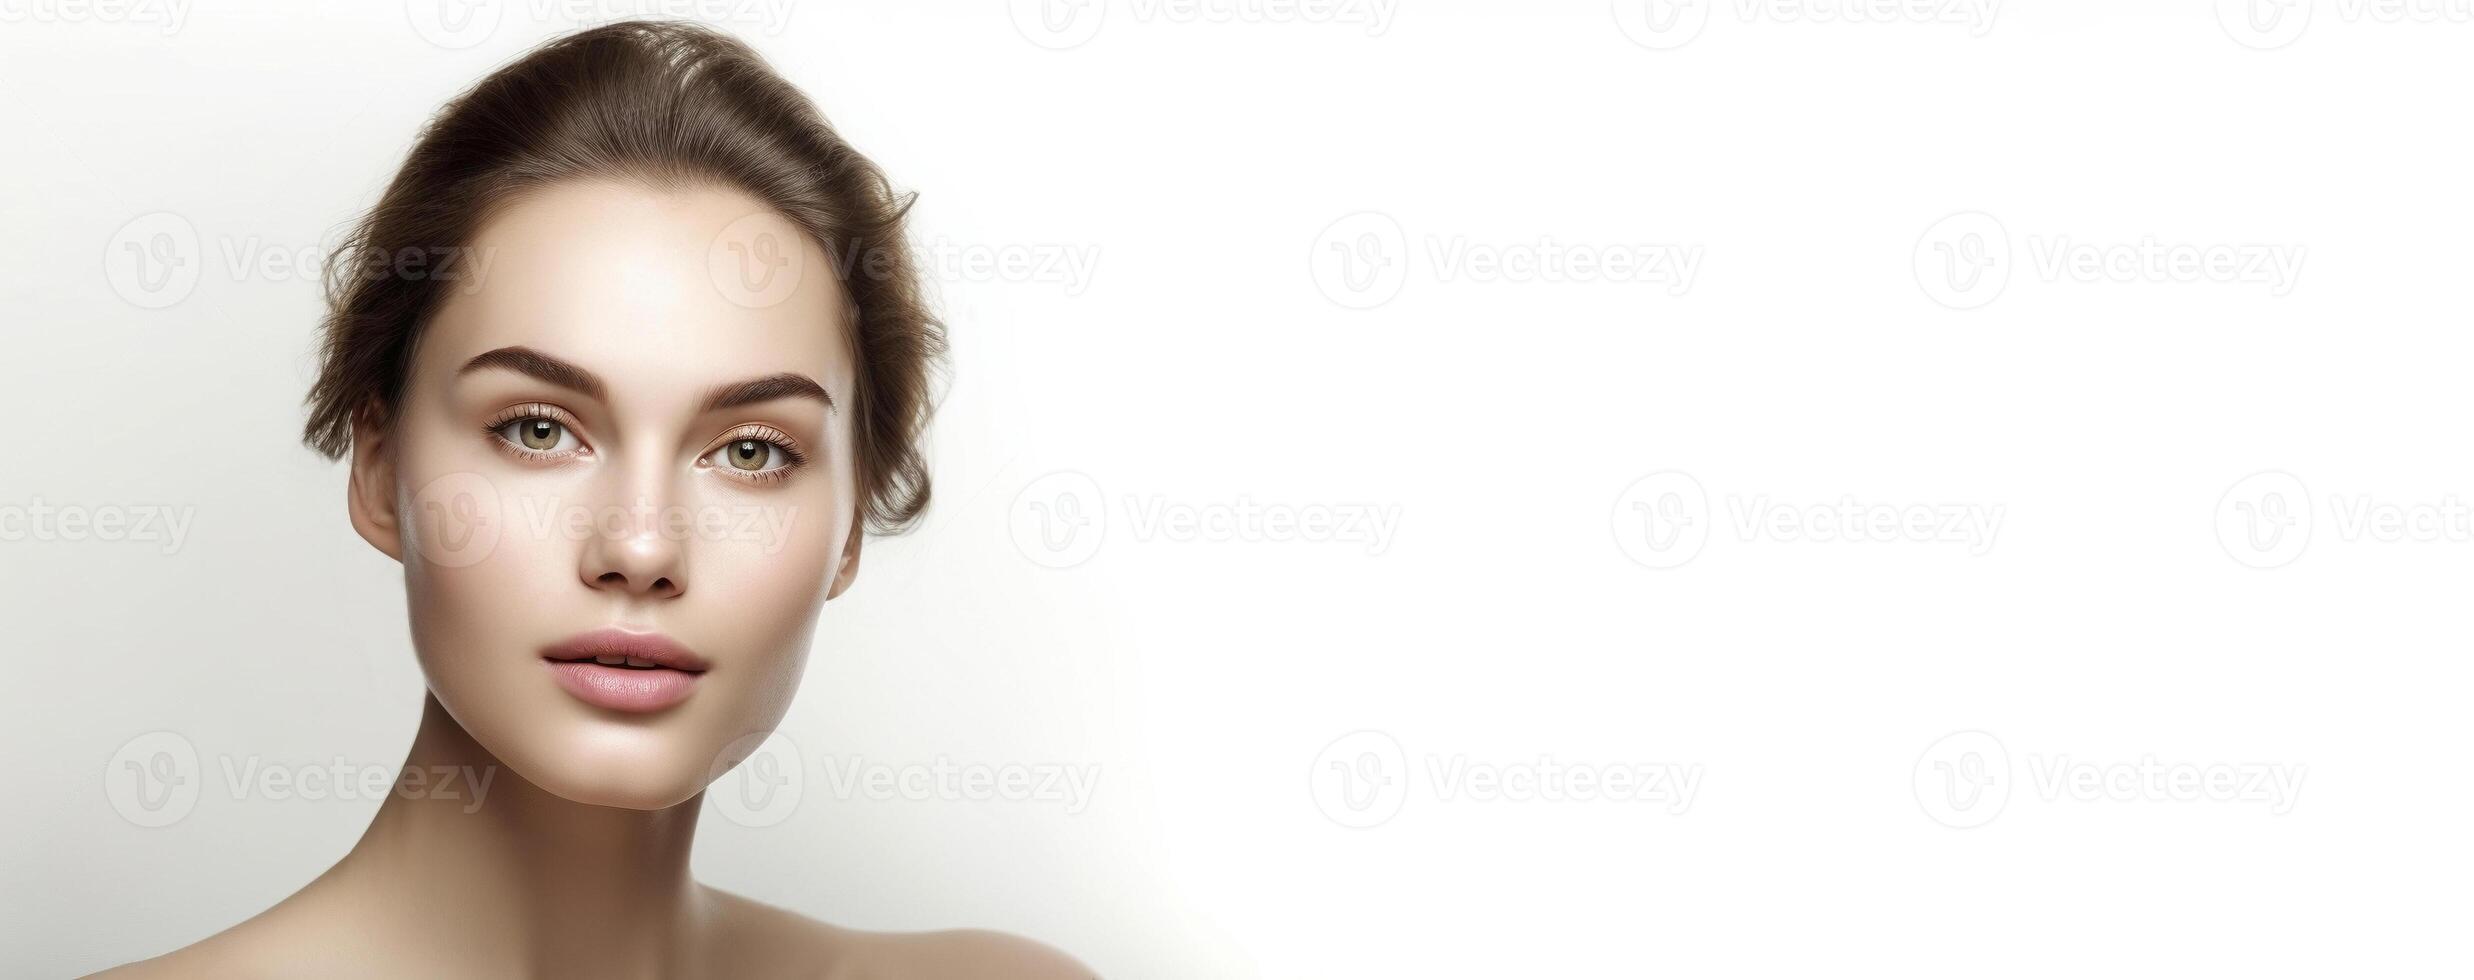 Beautiful woman face on white with copyspace, created with photo